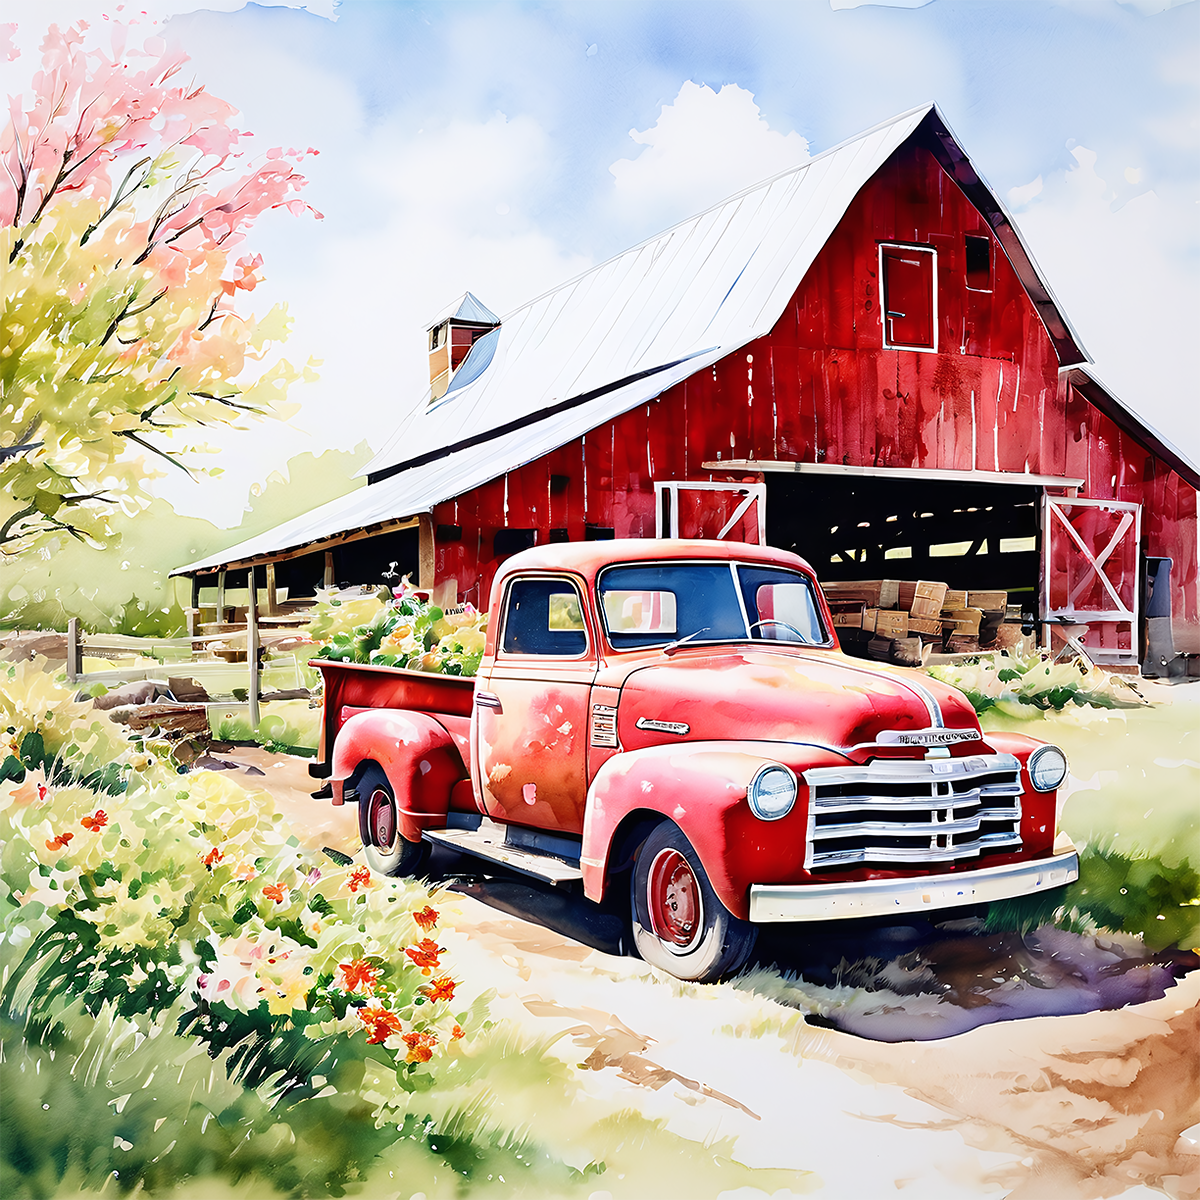 Vintage Red Truck & Barn | Ceramic Cup Coasters *Pack Of 4